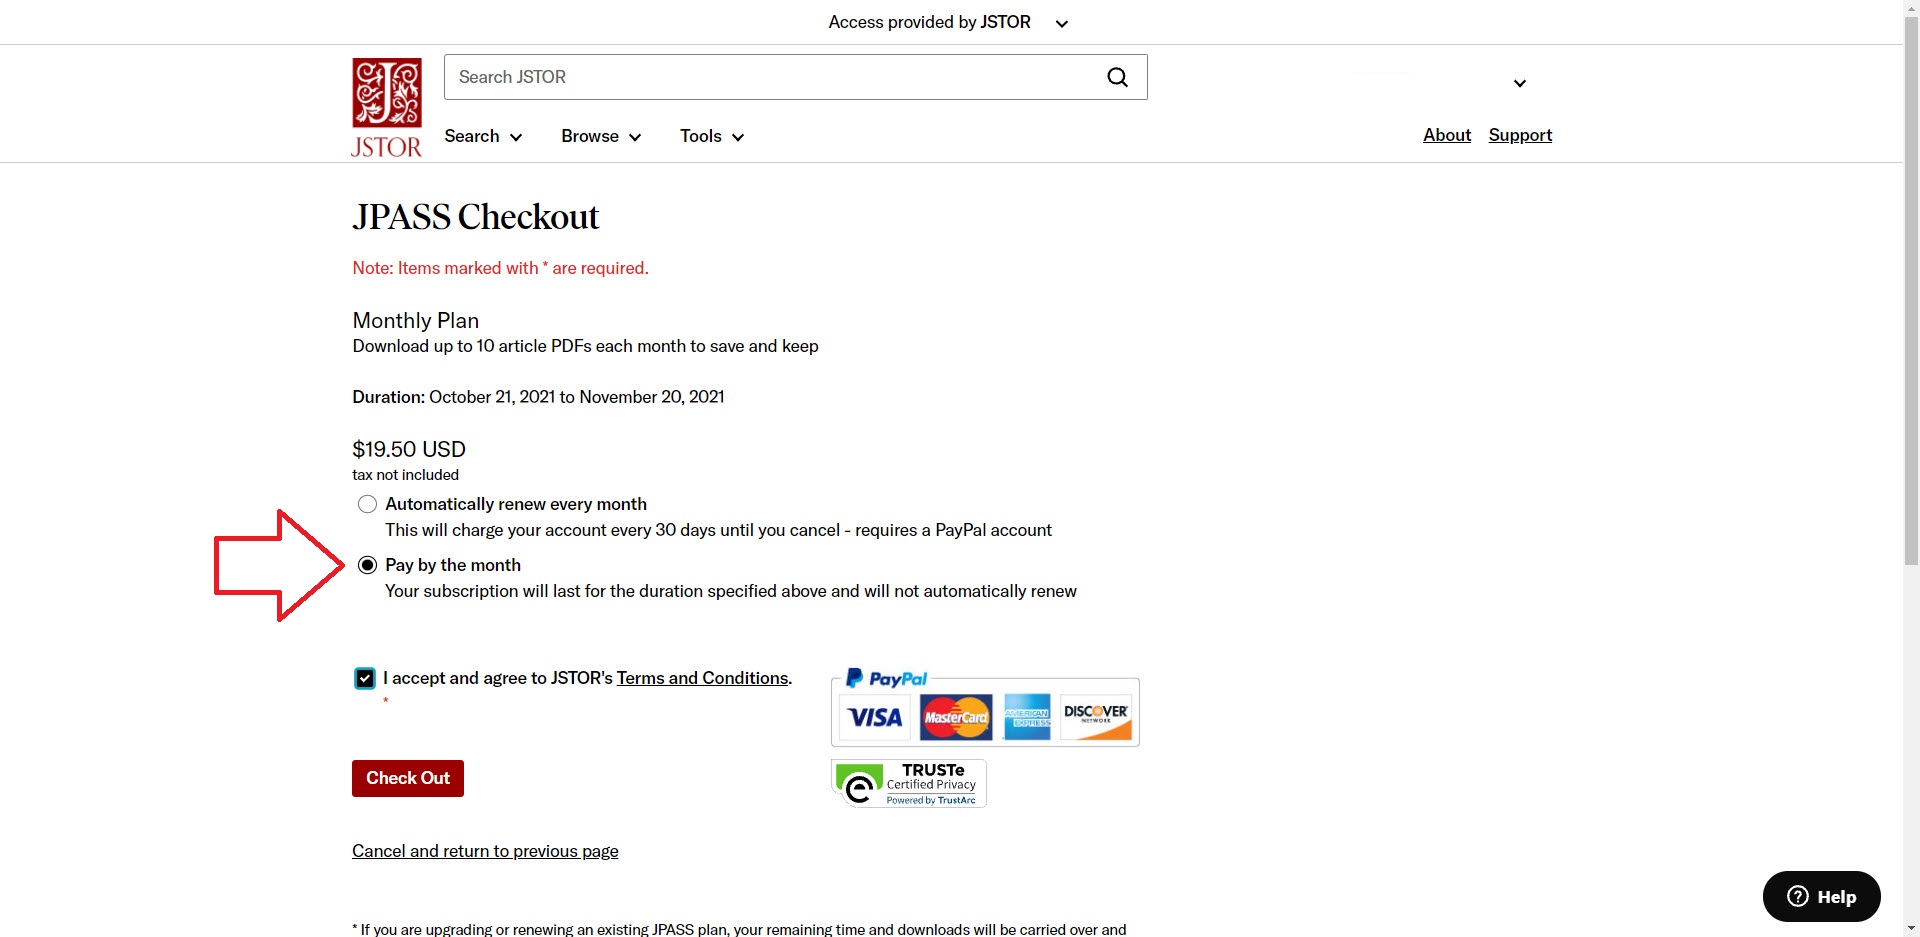 example of JPASS checkout screen